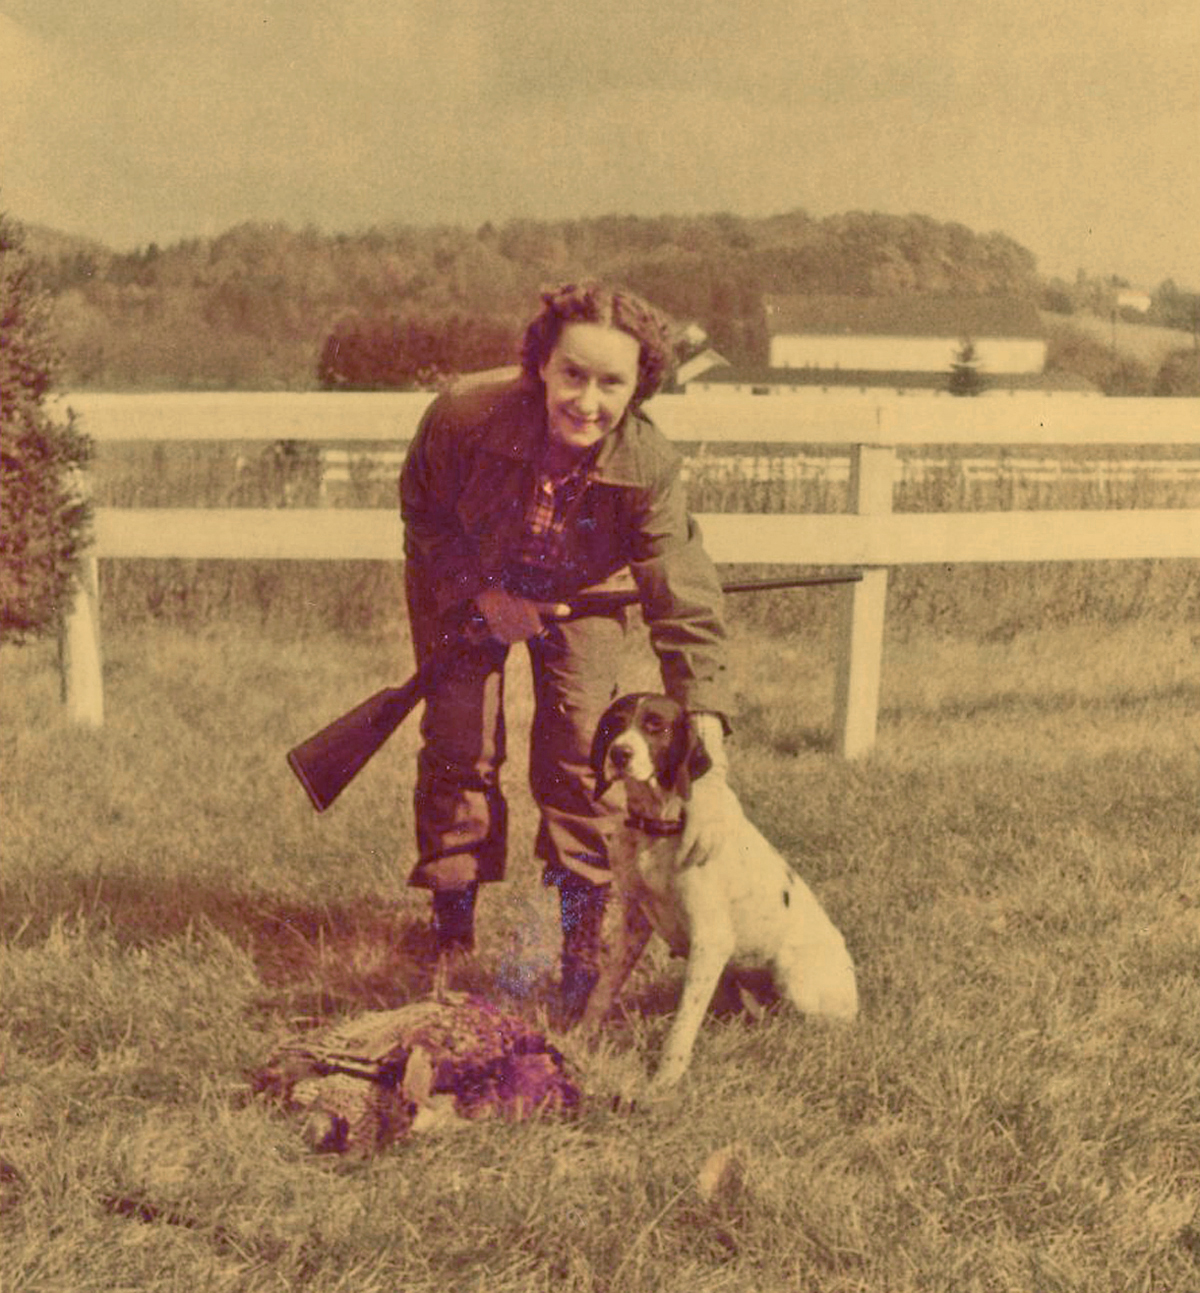 Evelyn Evans posing after a day hunting in the field, 1950s. Evans Family papers and photographs, MSS 818, Detre Library & Archives, Heinz History Center.